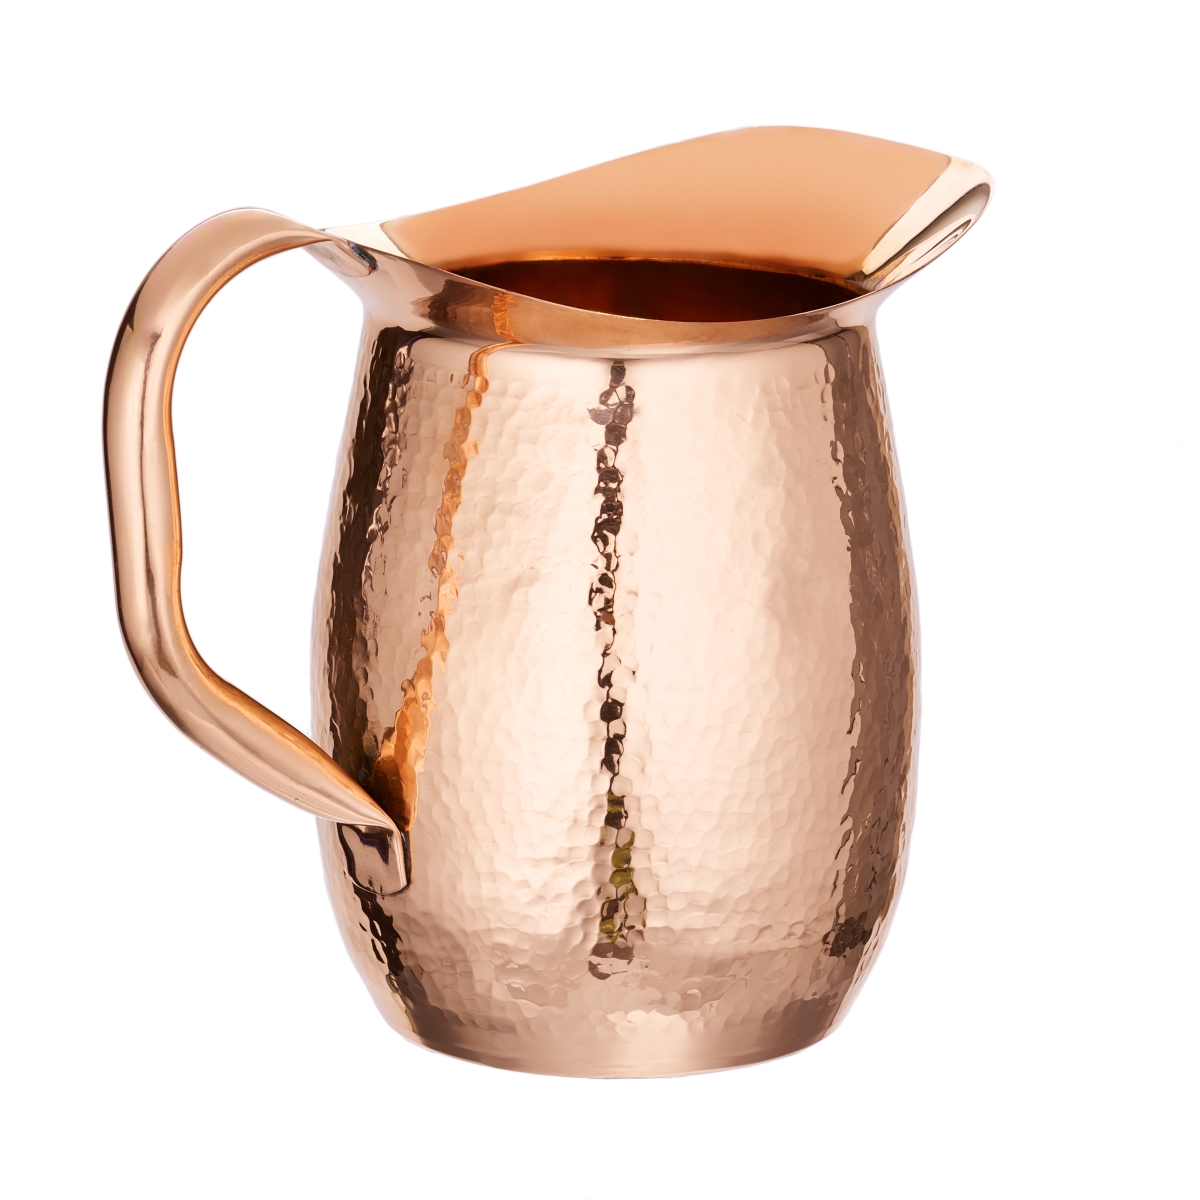 1520 8.5 X 5.5 X 7.87 In. Stone Hammered Water Pitcher, Solid Copper - 2 Qt.